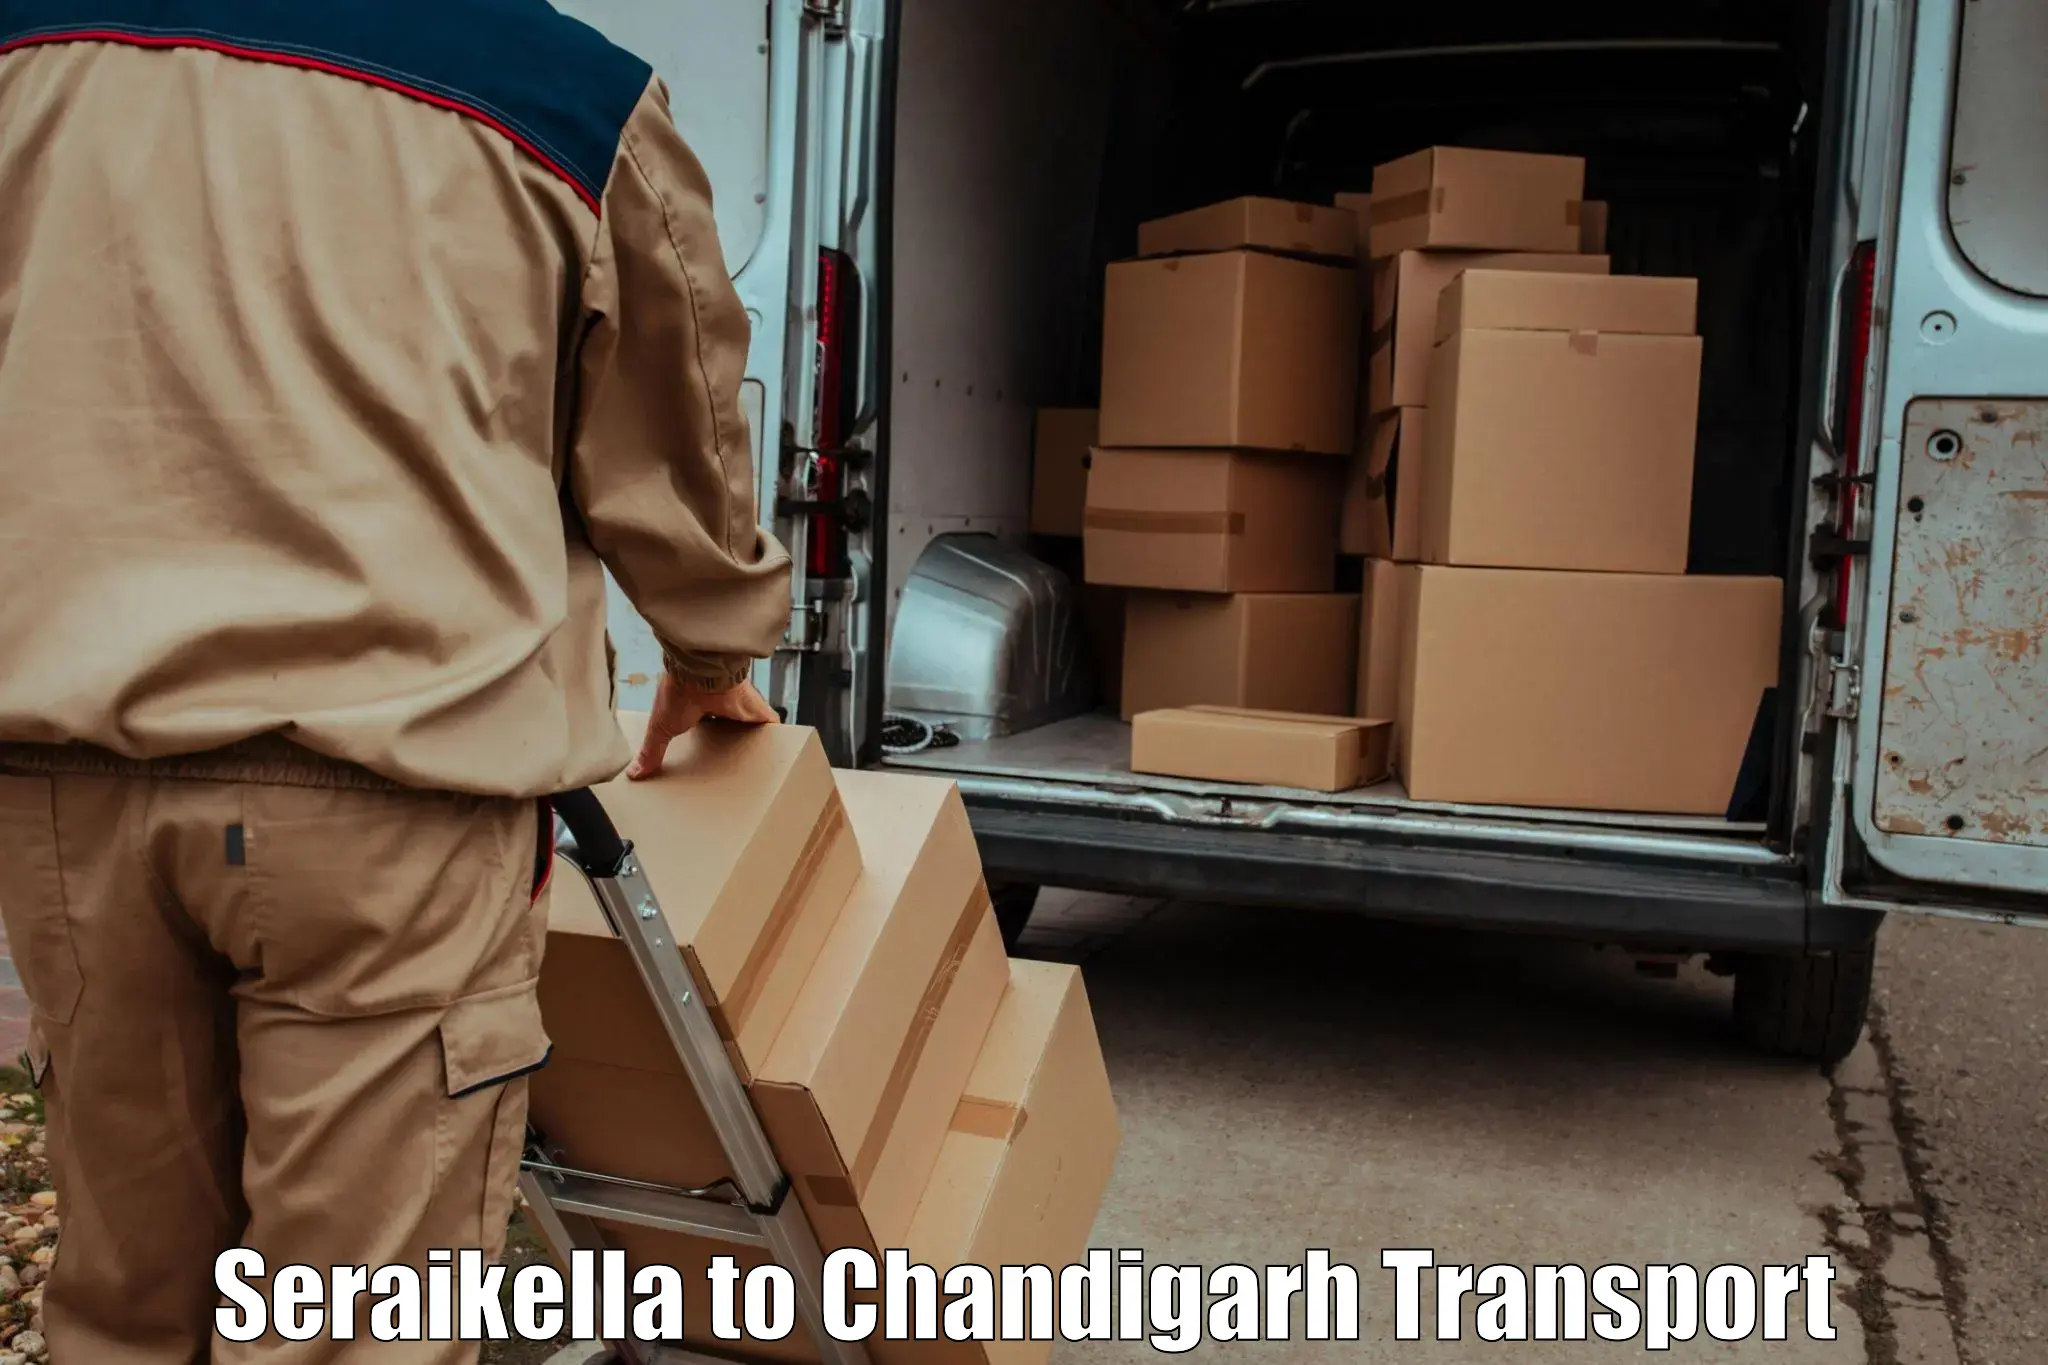 Commercial transport service Seraikella to Chandigarh